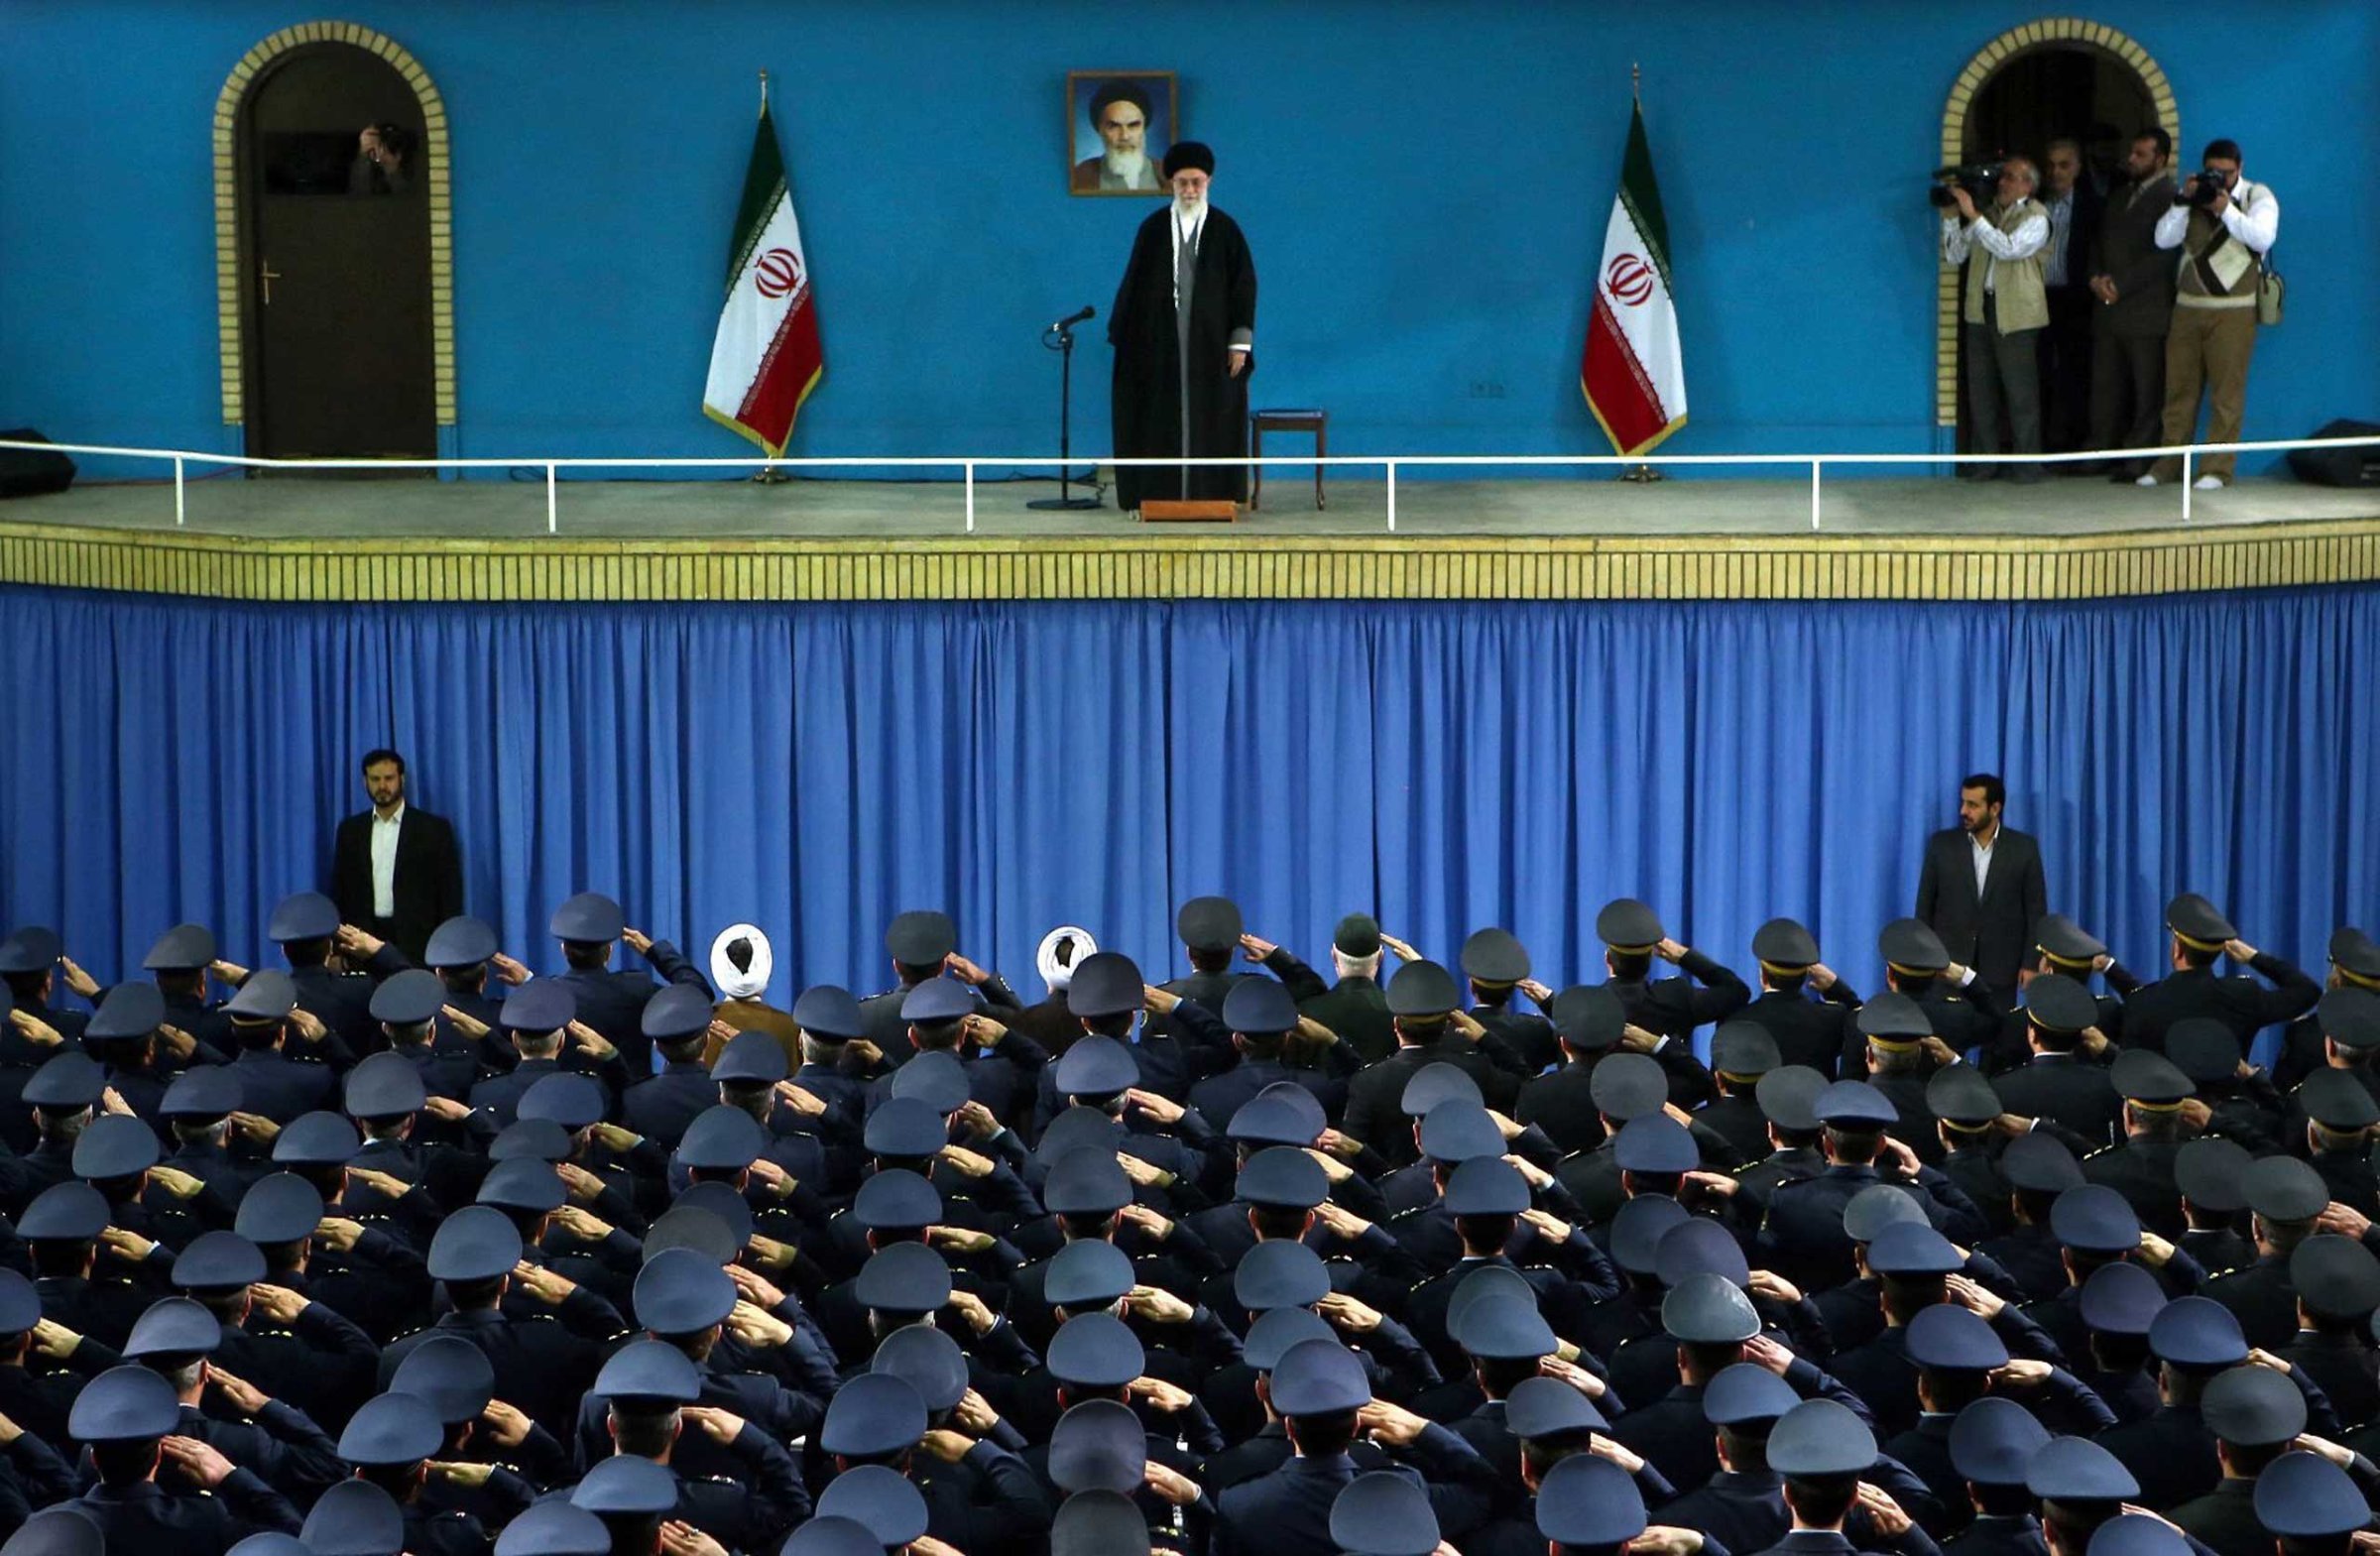 Army air force officers salute Supreme Leader Ayatollah Ali Khamenei during a ceremony in Tehran, Feb. 8, 2015.